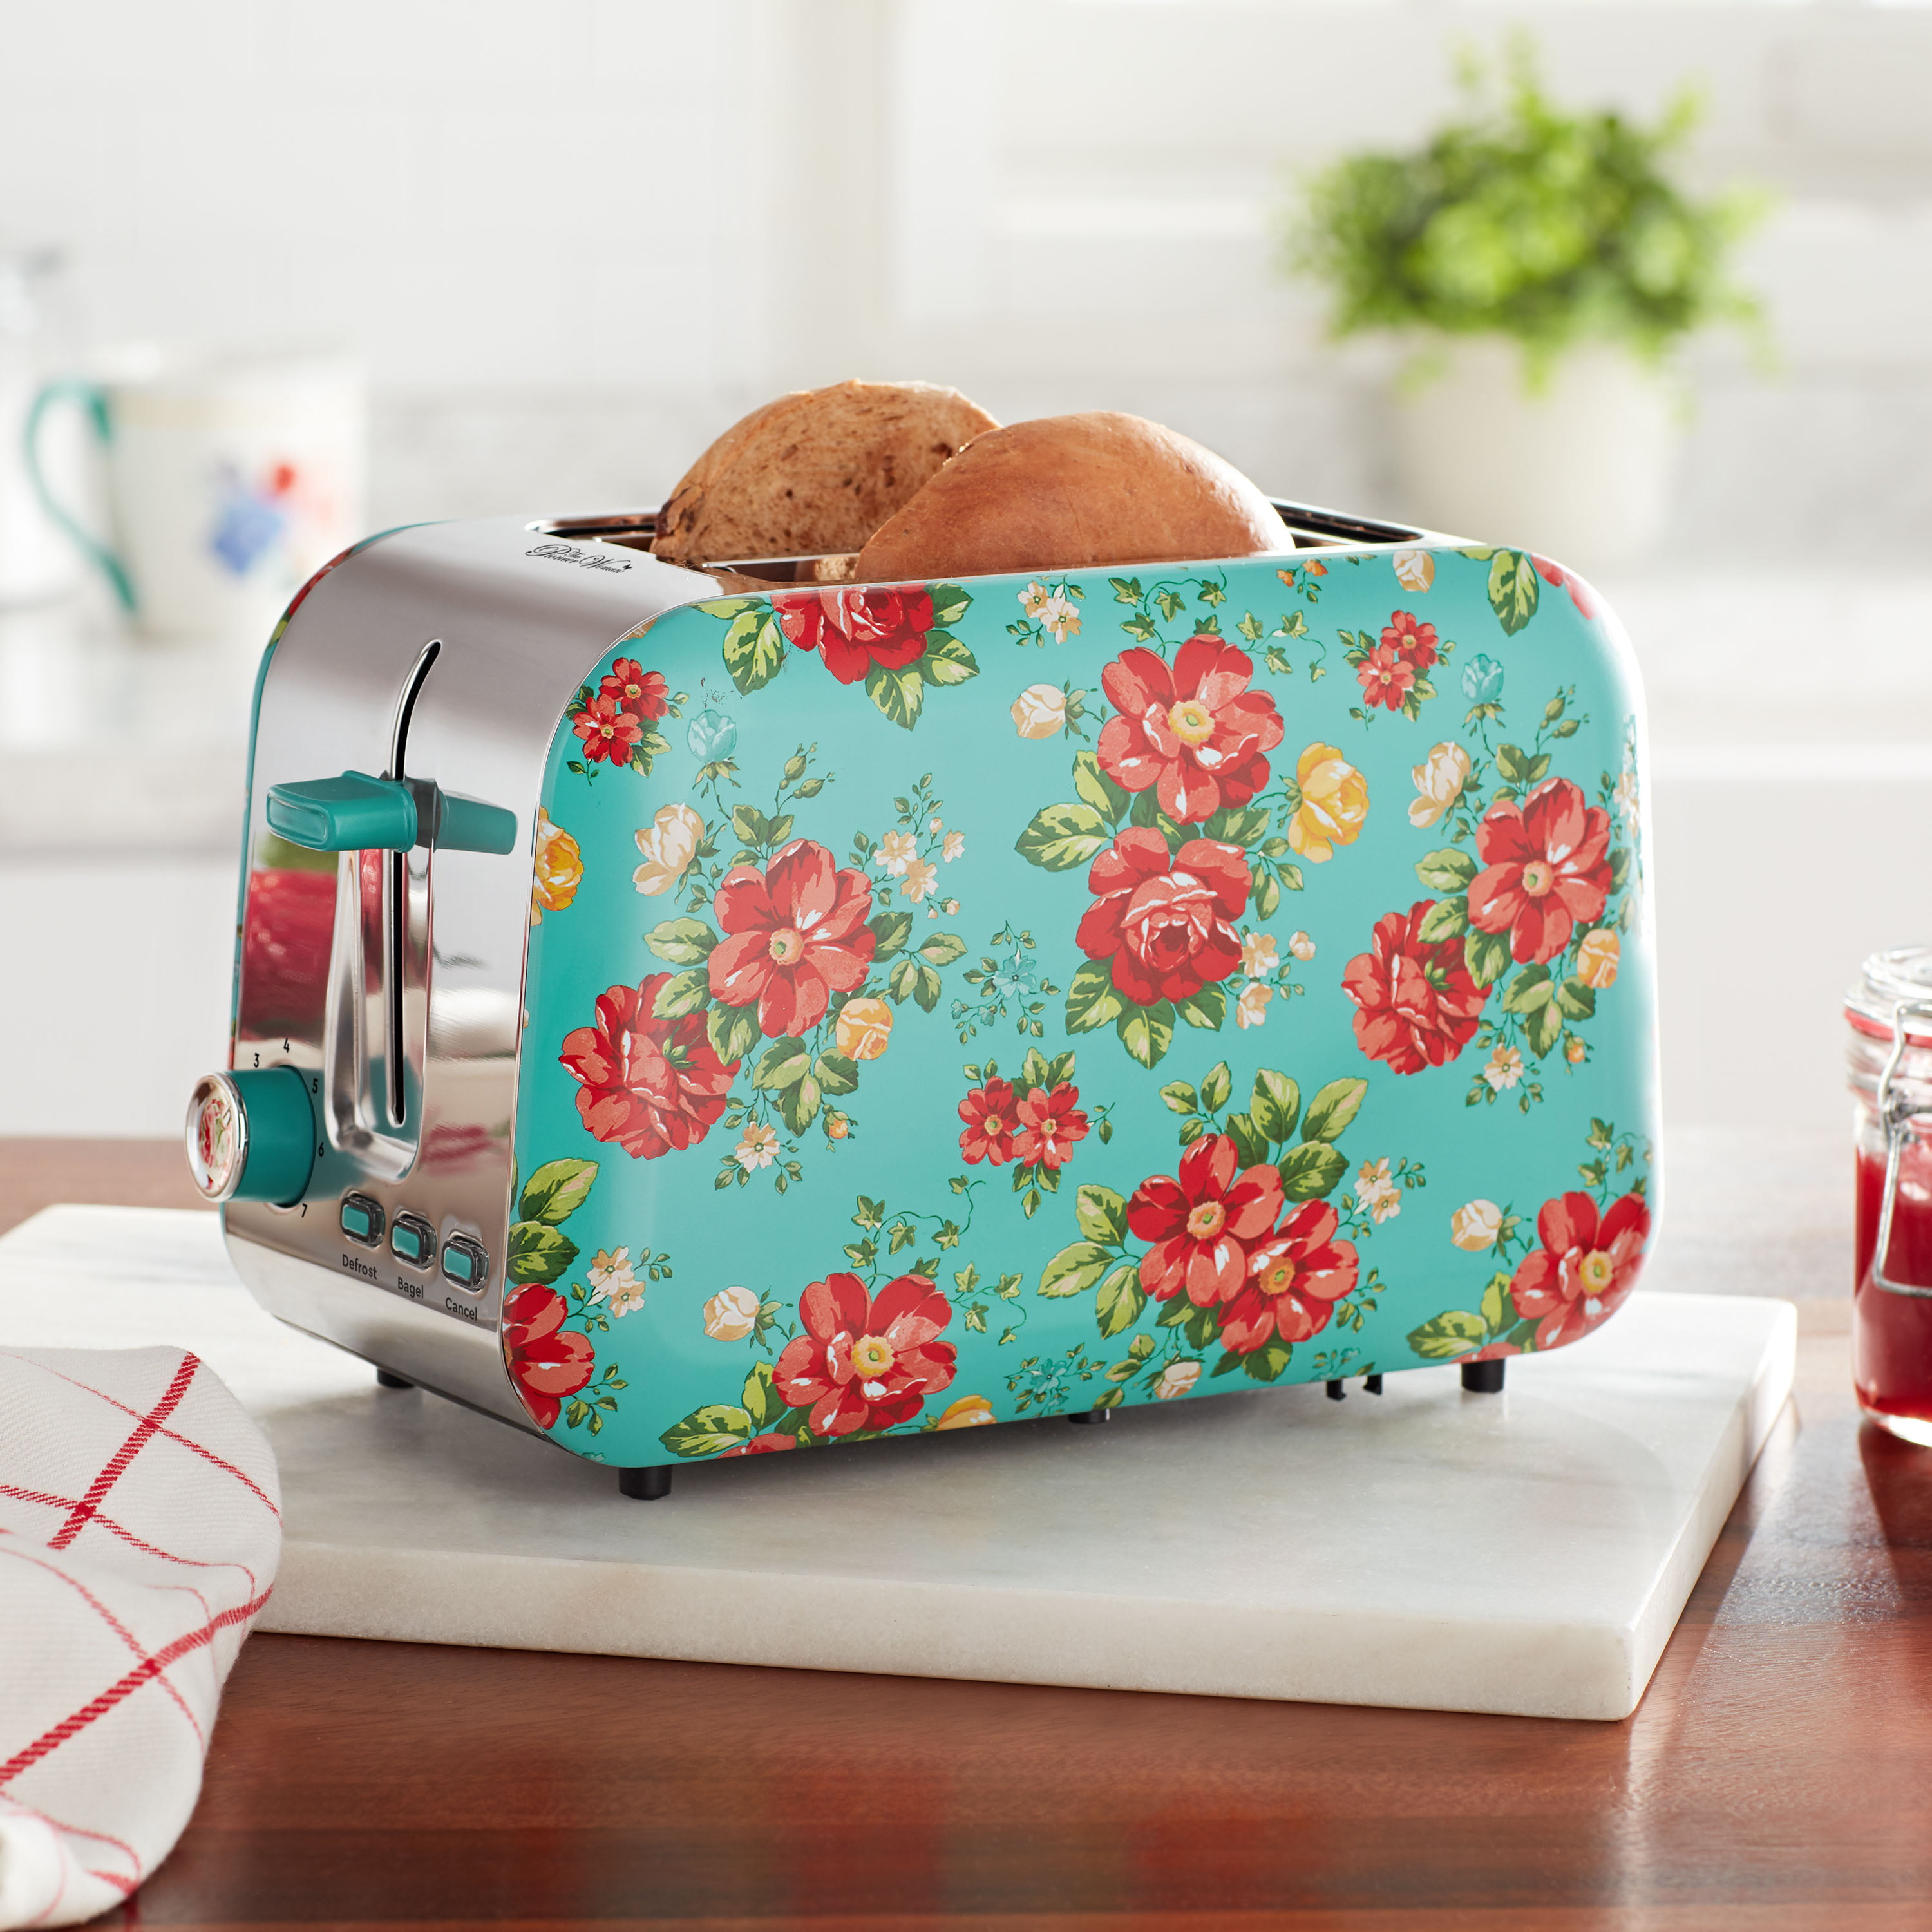 Pioneer Woman Toaster Cover 2 Slice Toaster Cover PW 